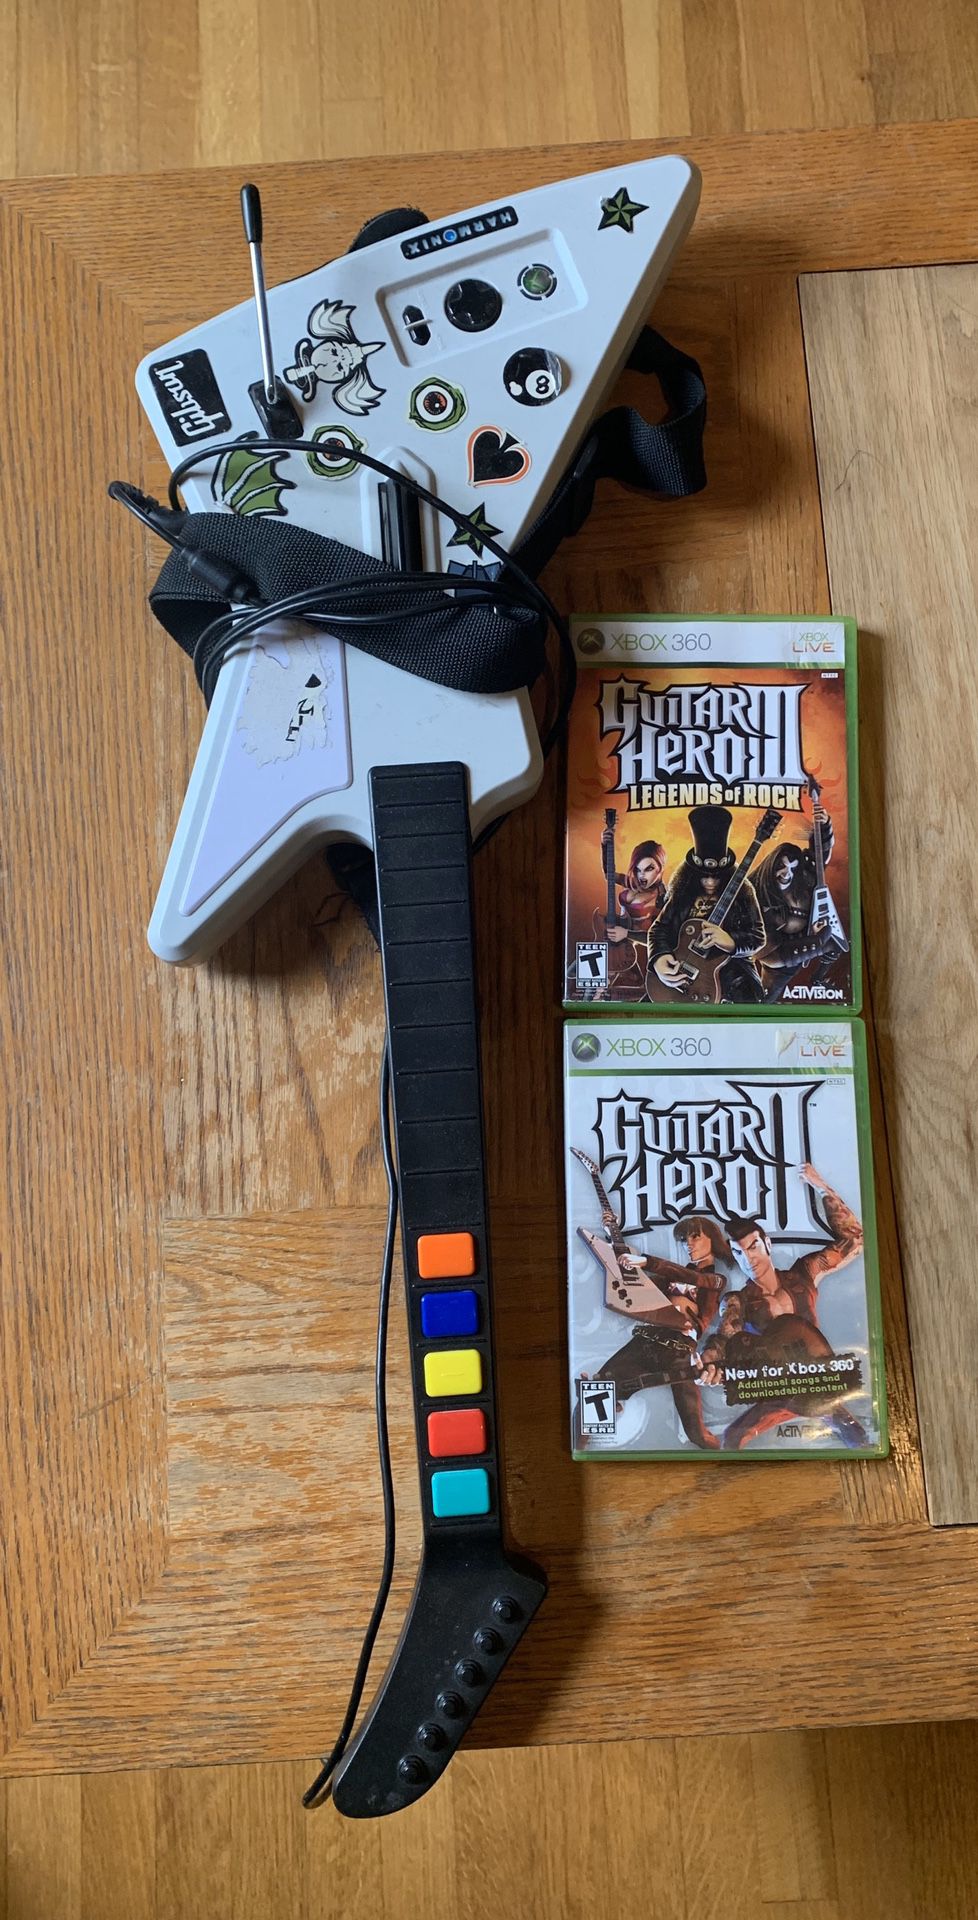 Guitar Hero guitar and disc for Xbox 360